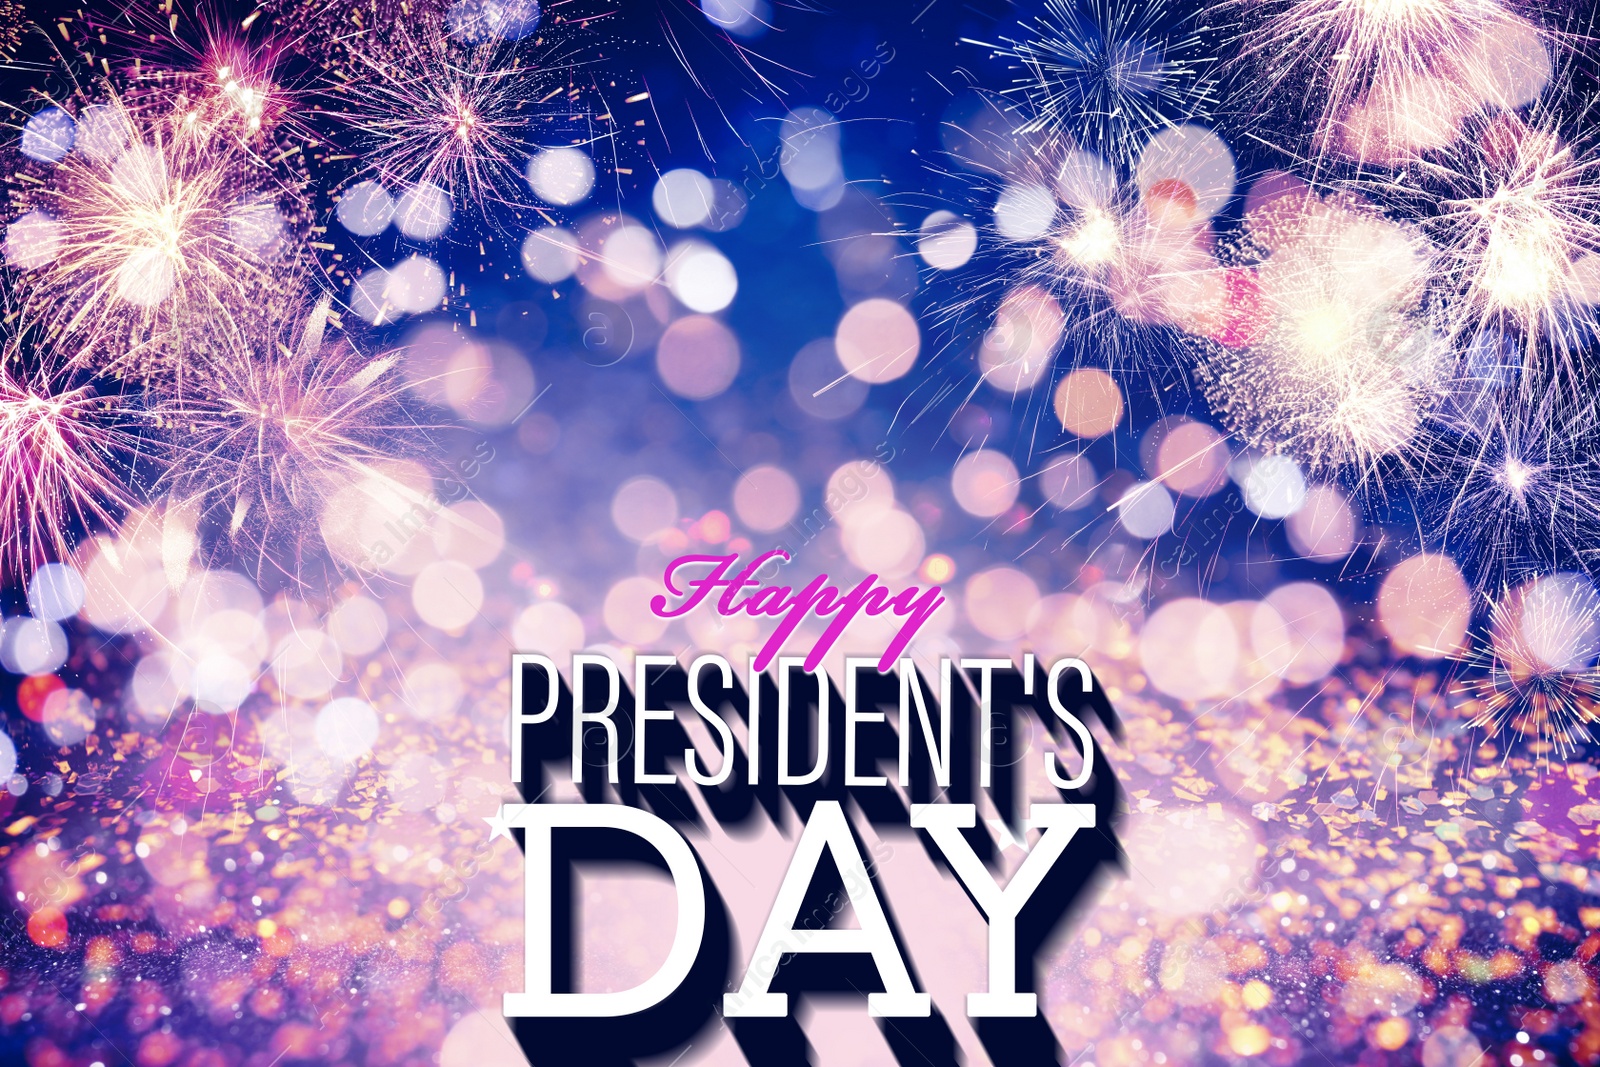 Image of Happy President's Day - federal holiday. Festive background with fireworks and glitters, bokeh effect